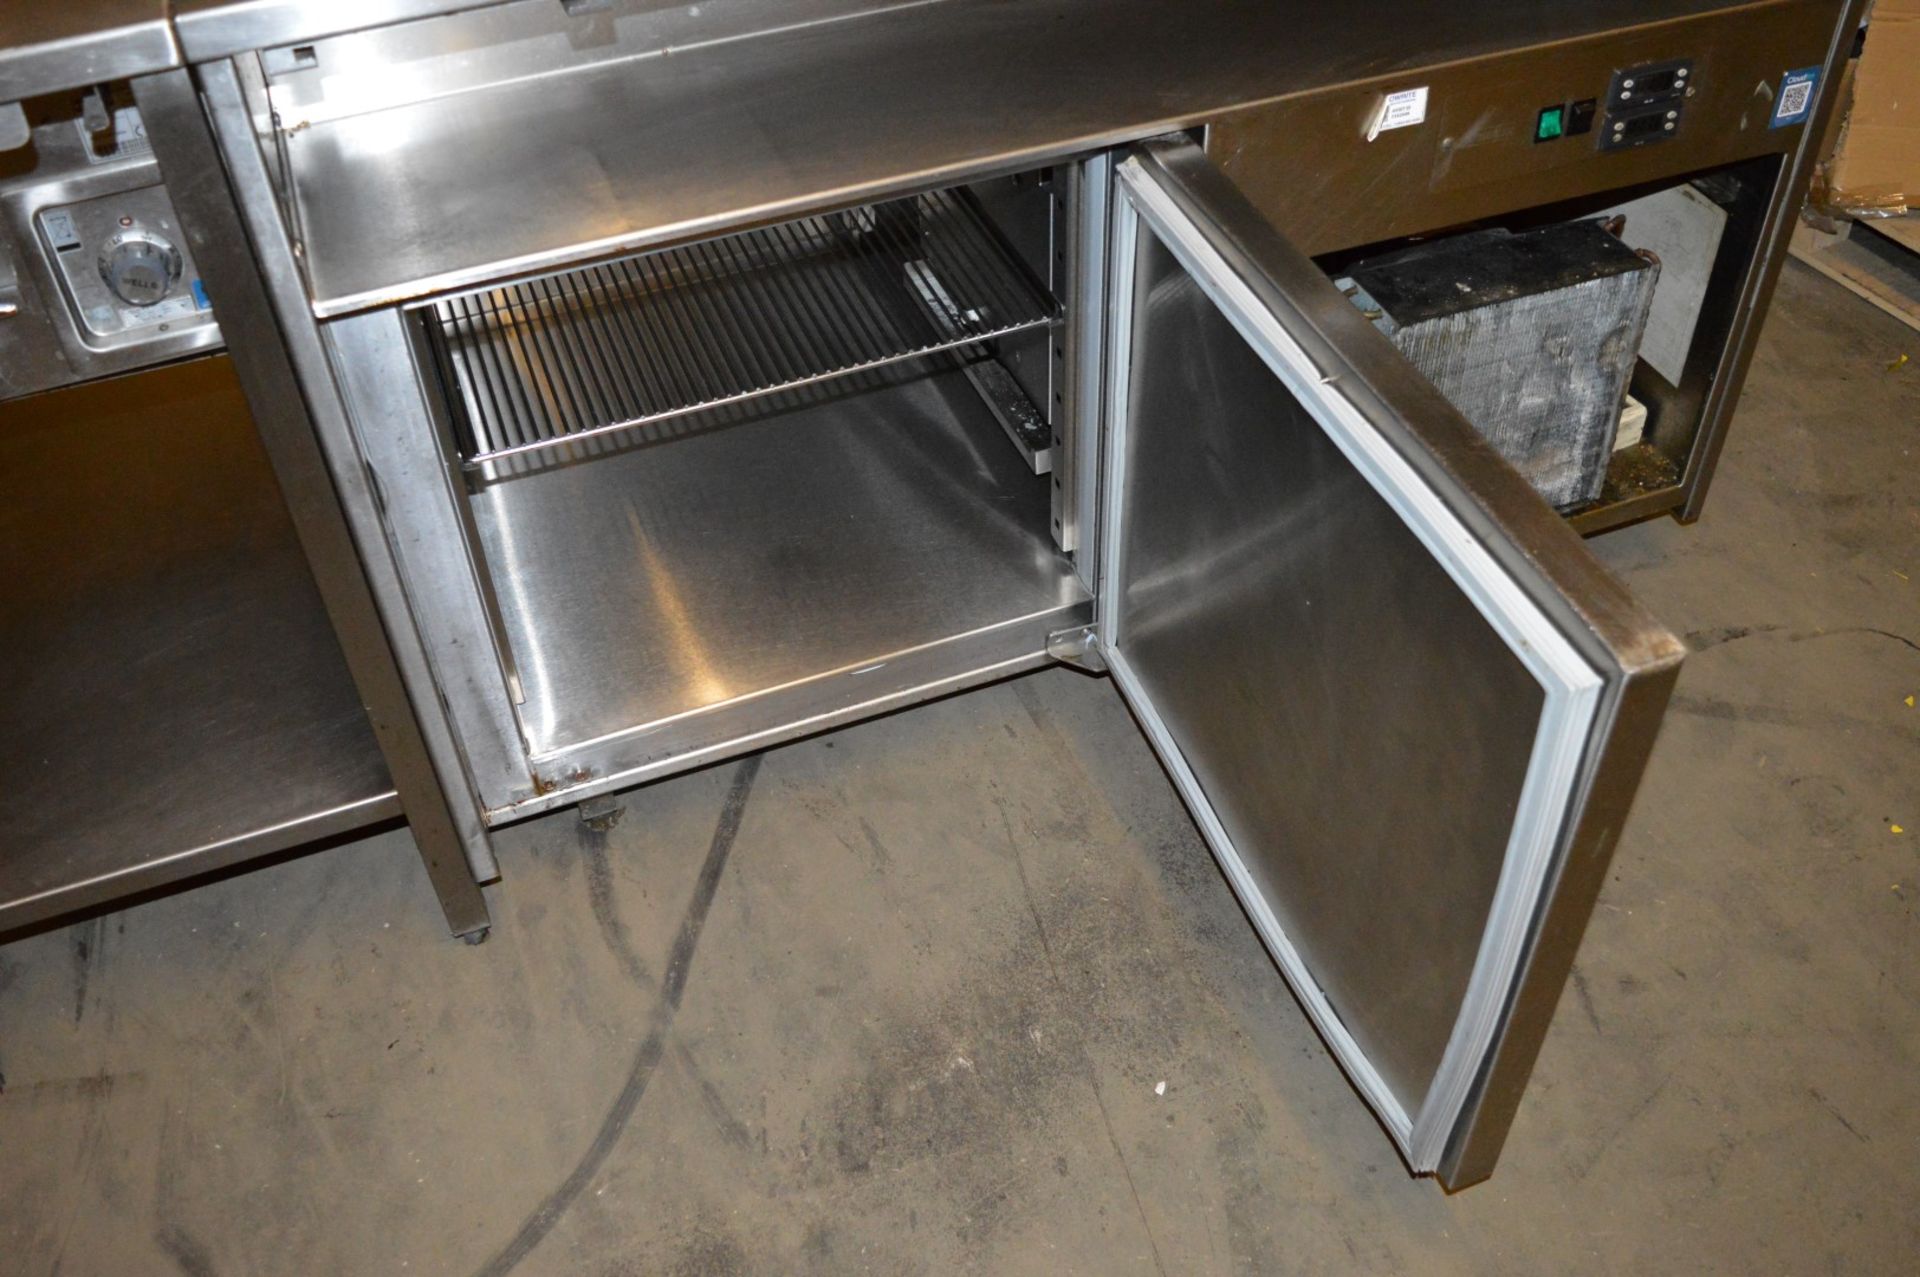 1 x Franke Stainless Steel Prep Table With Single Door Chiller, Fan Cooled Saladette, Wells SS206 - Image 9 of 12